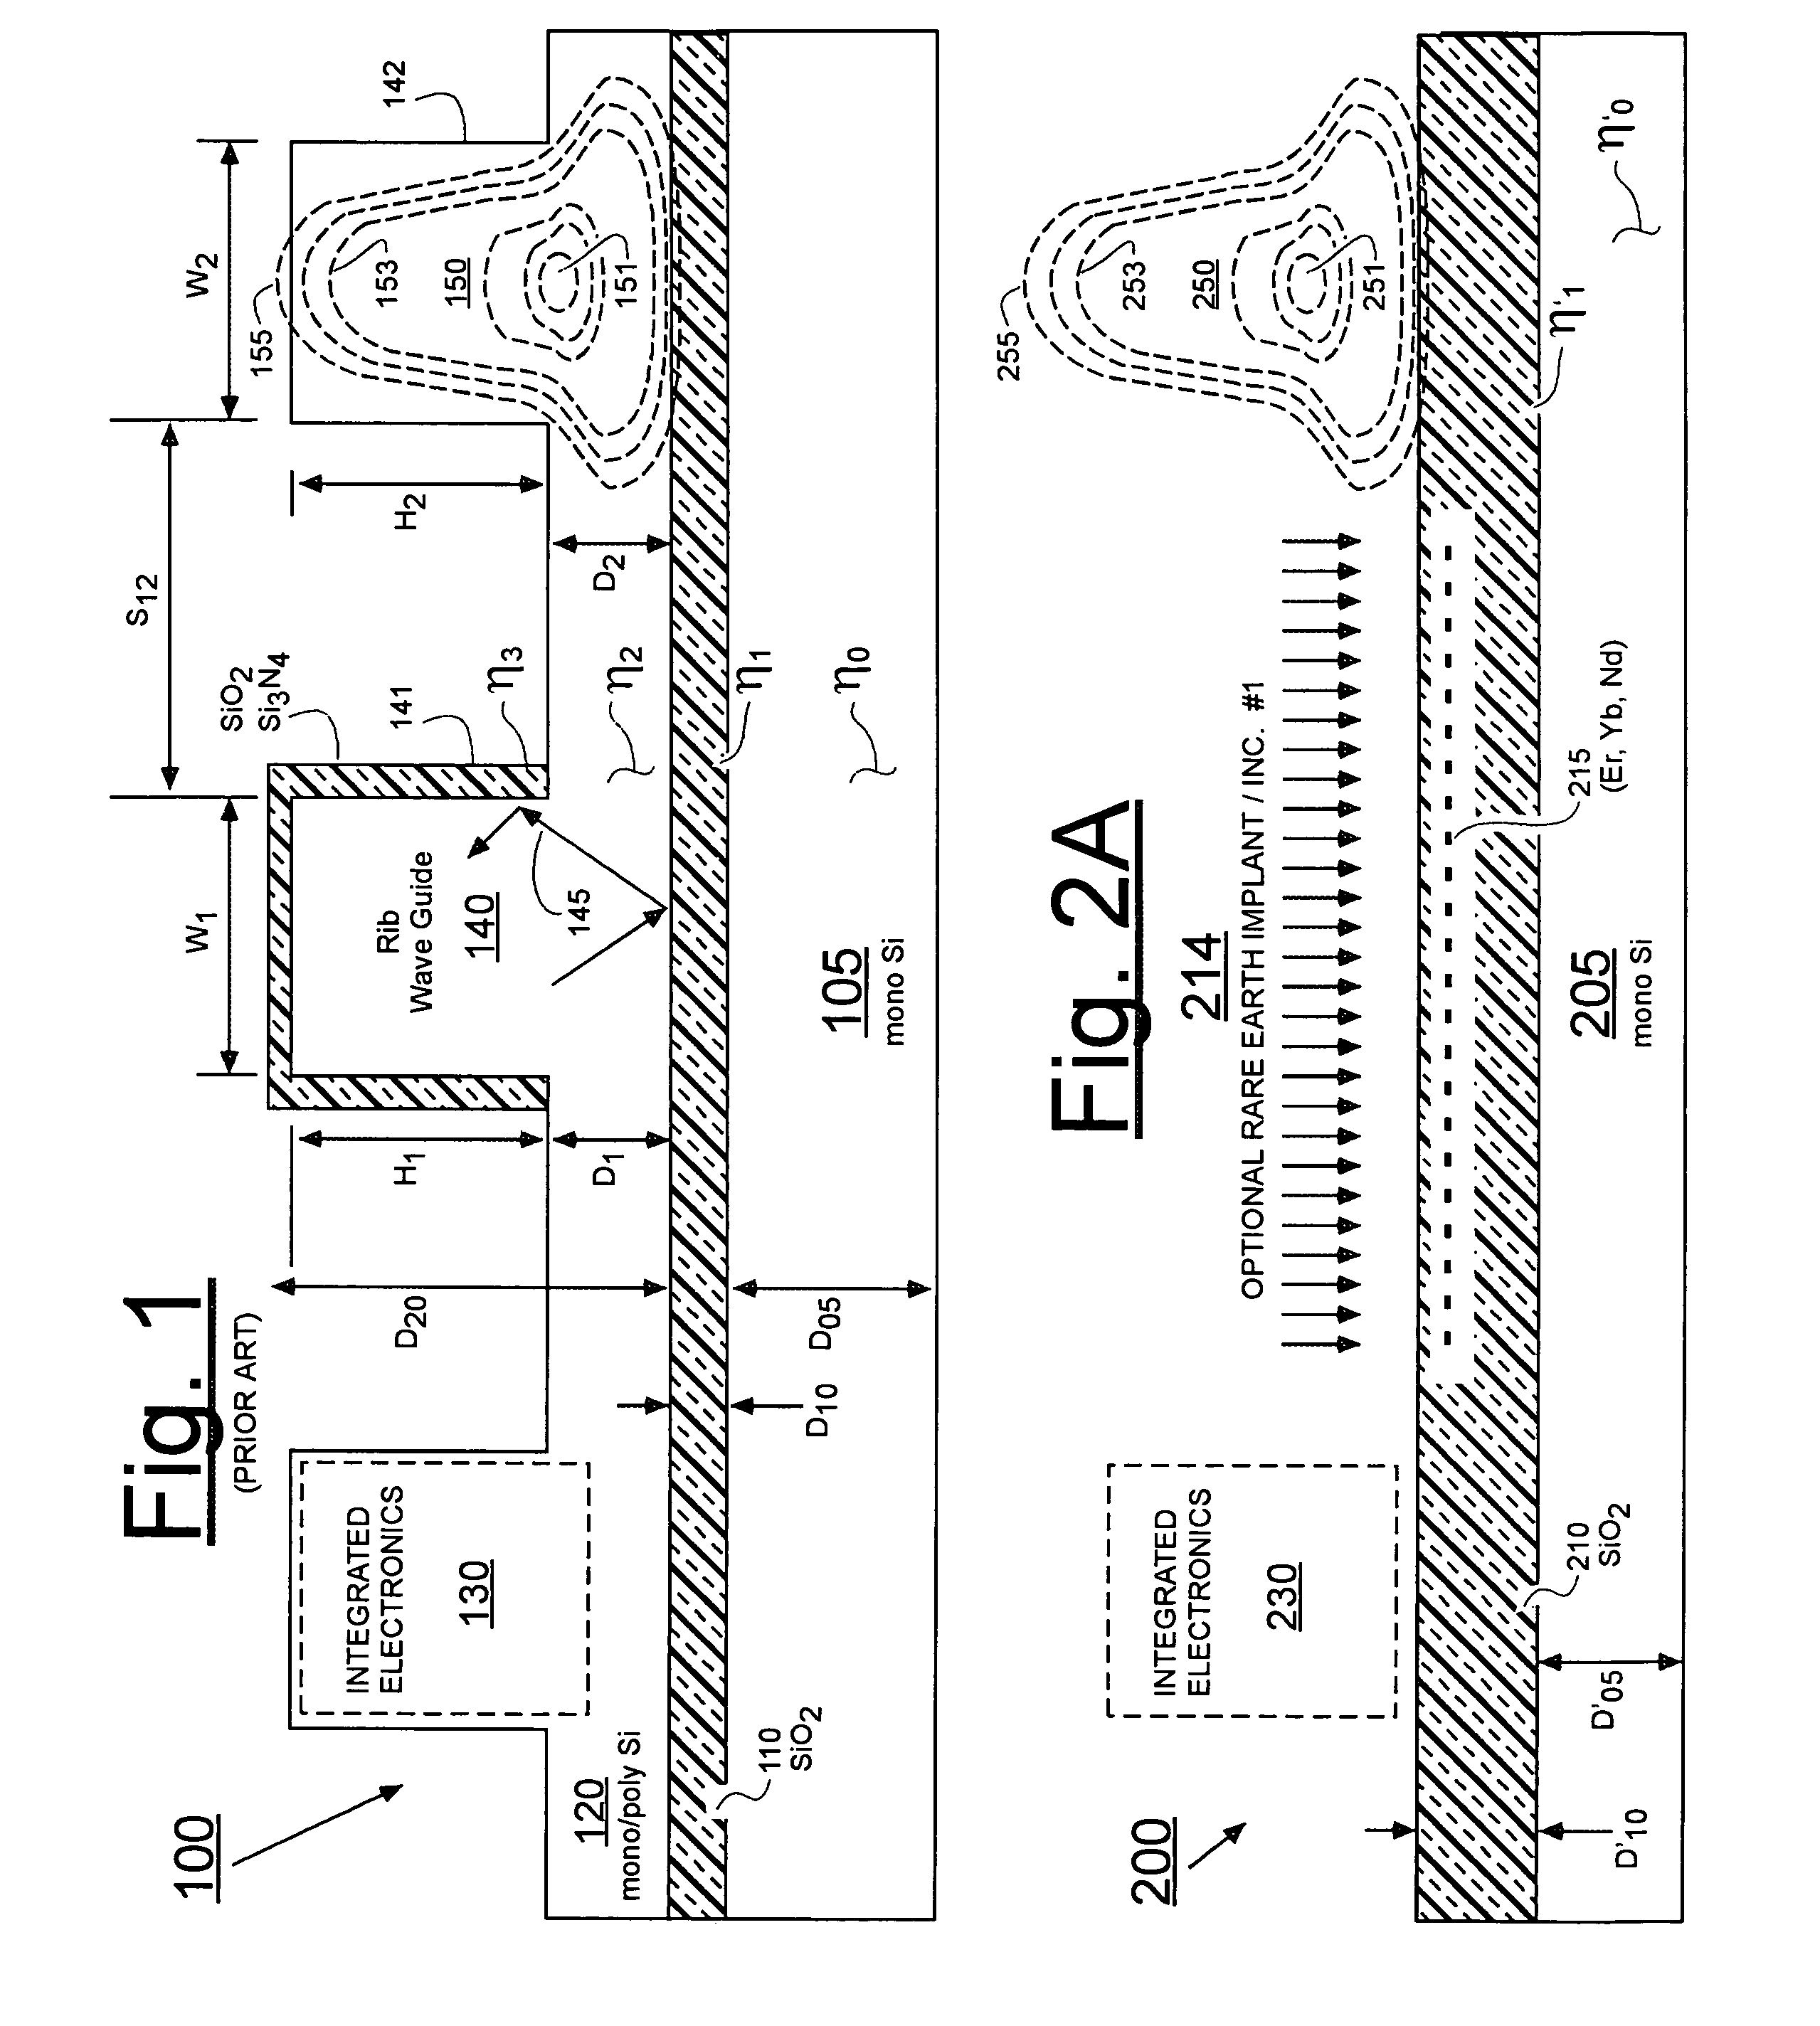 Integration of rare-earth doped amplifiers into semiconductor structures and uses of same